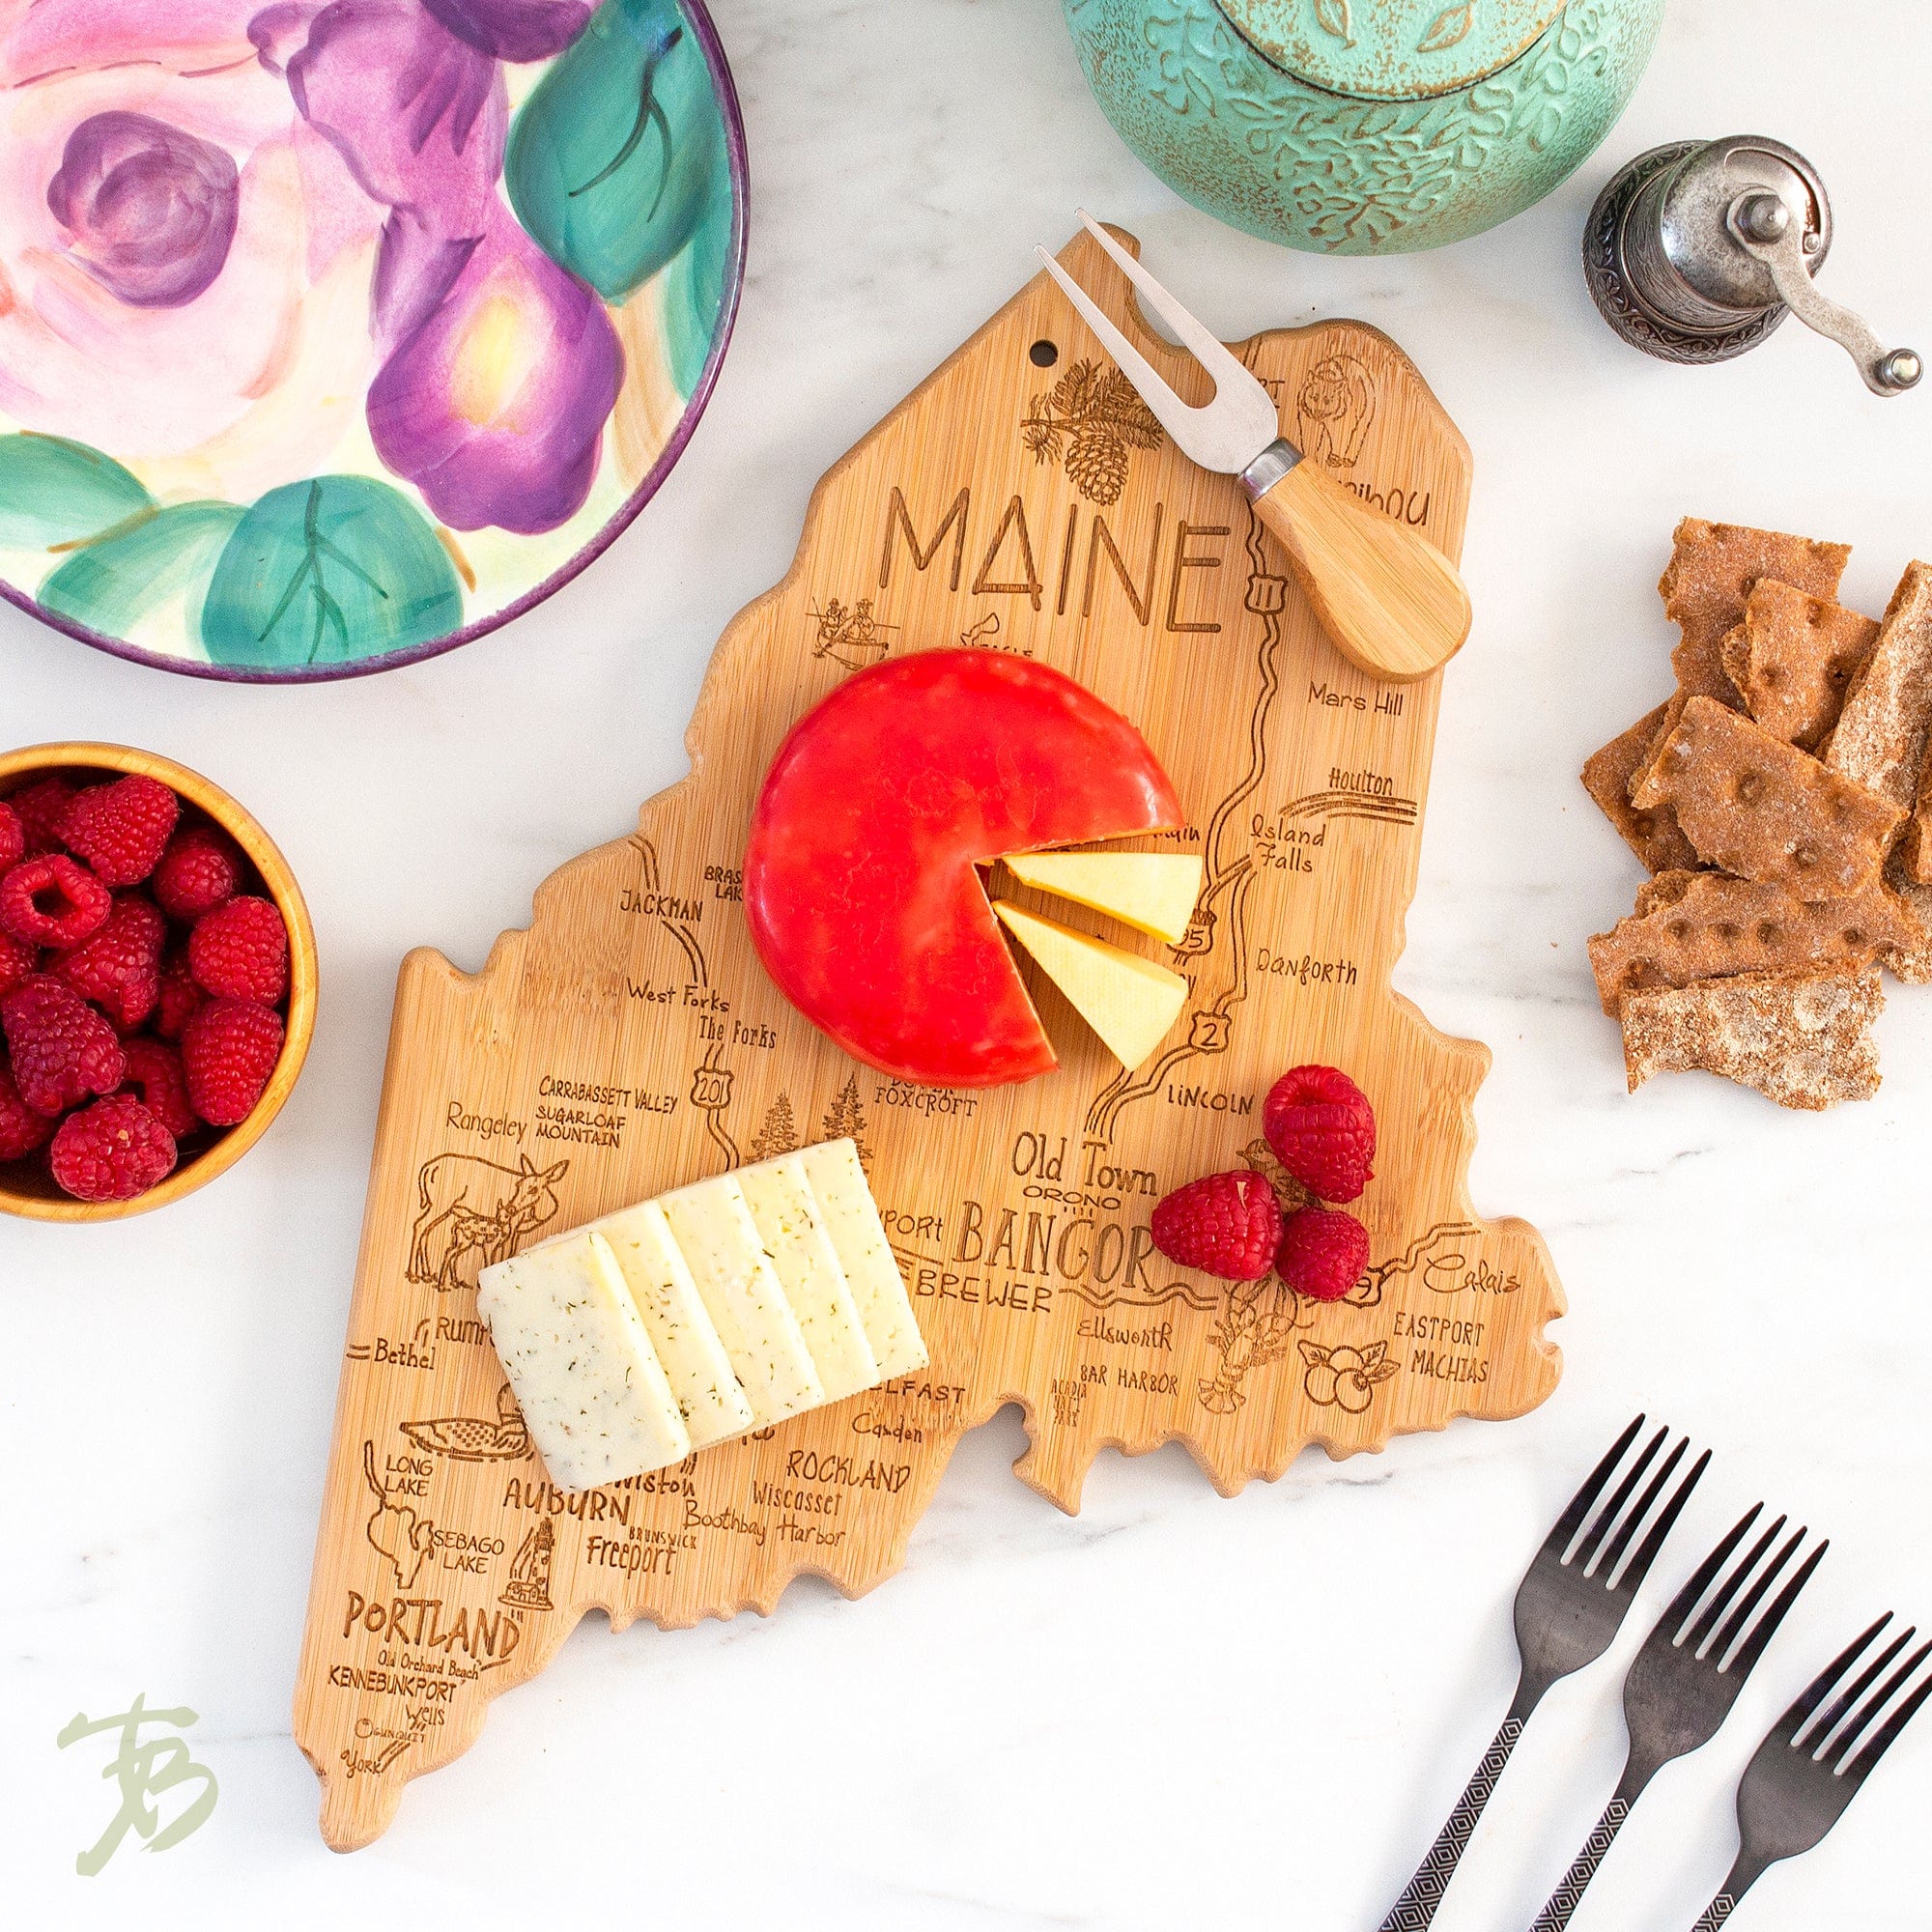 Totally Bamboo Destination Maine State Shaped Bamboo Serving and Cutting Board